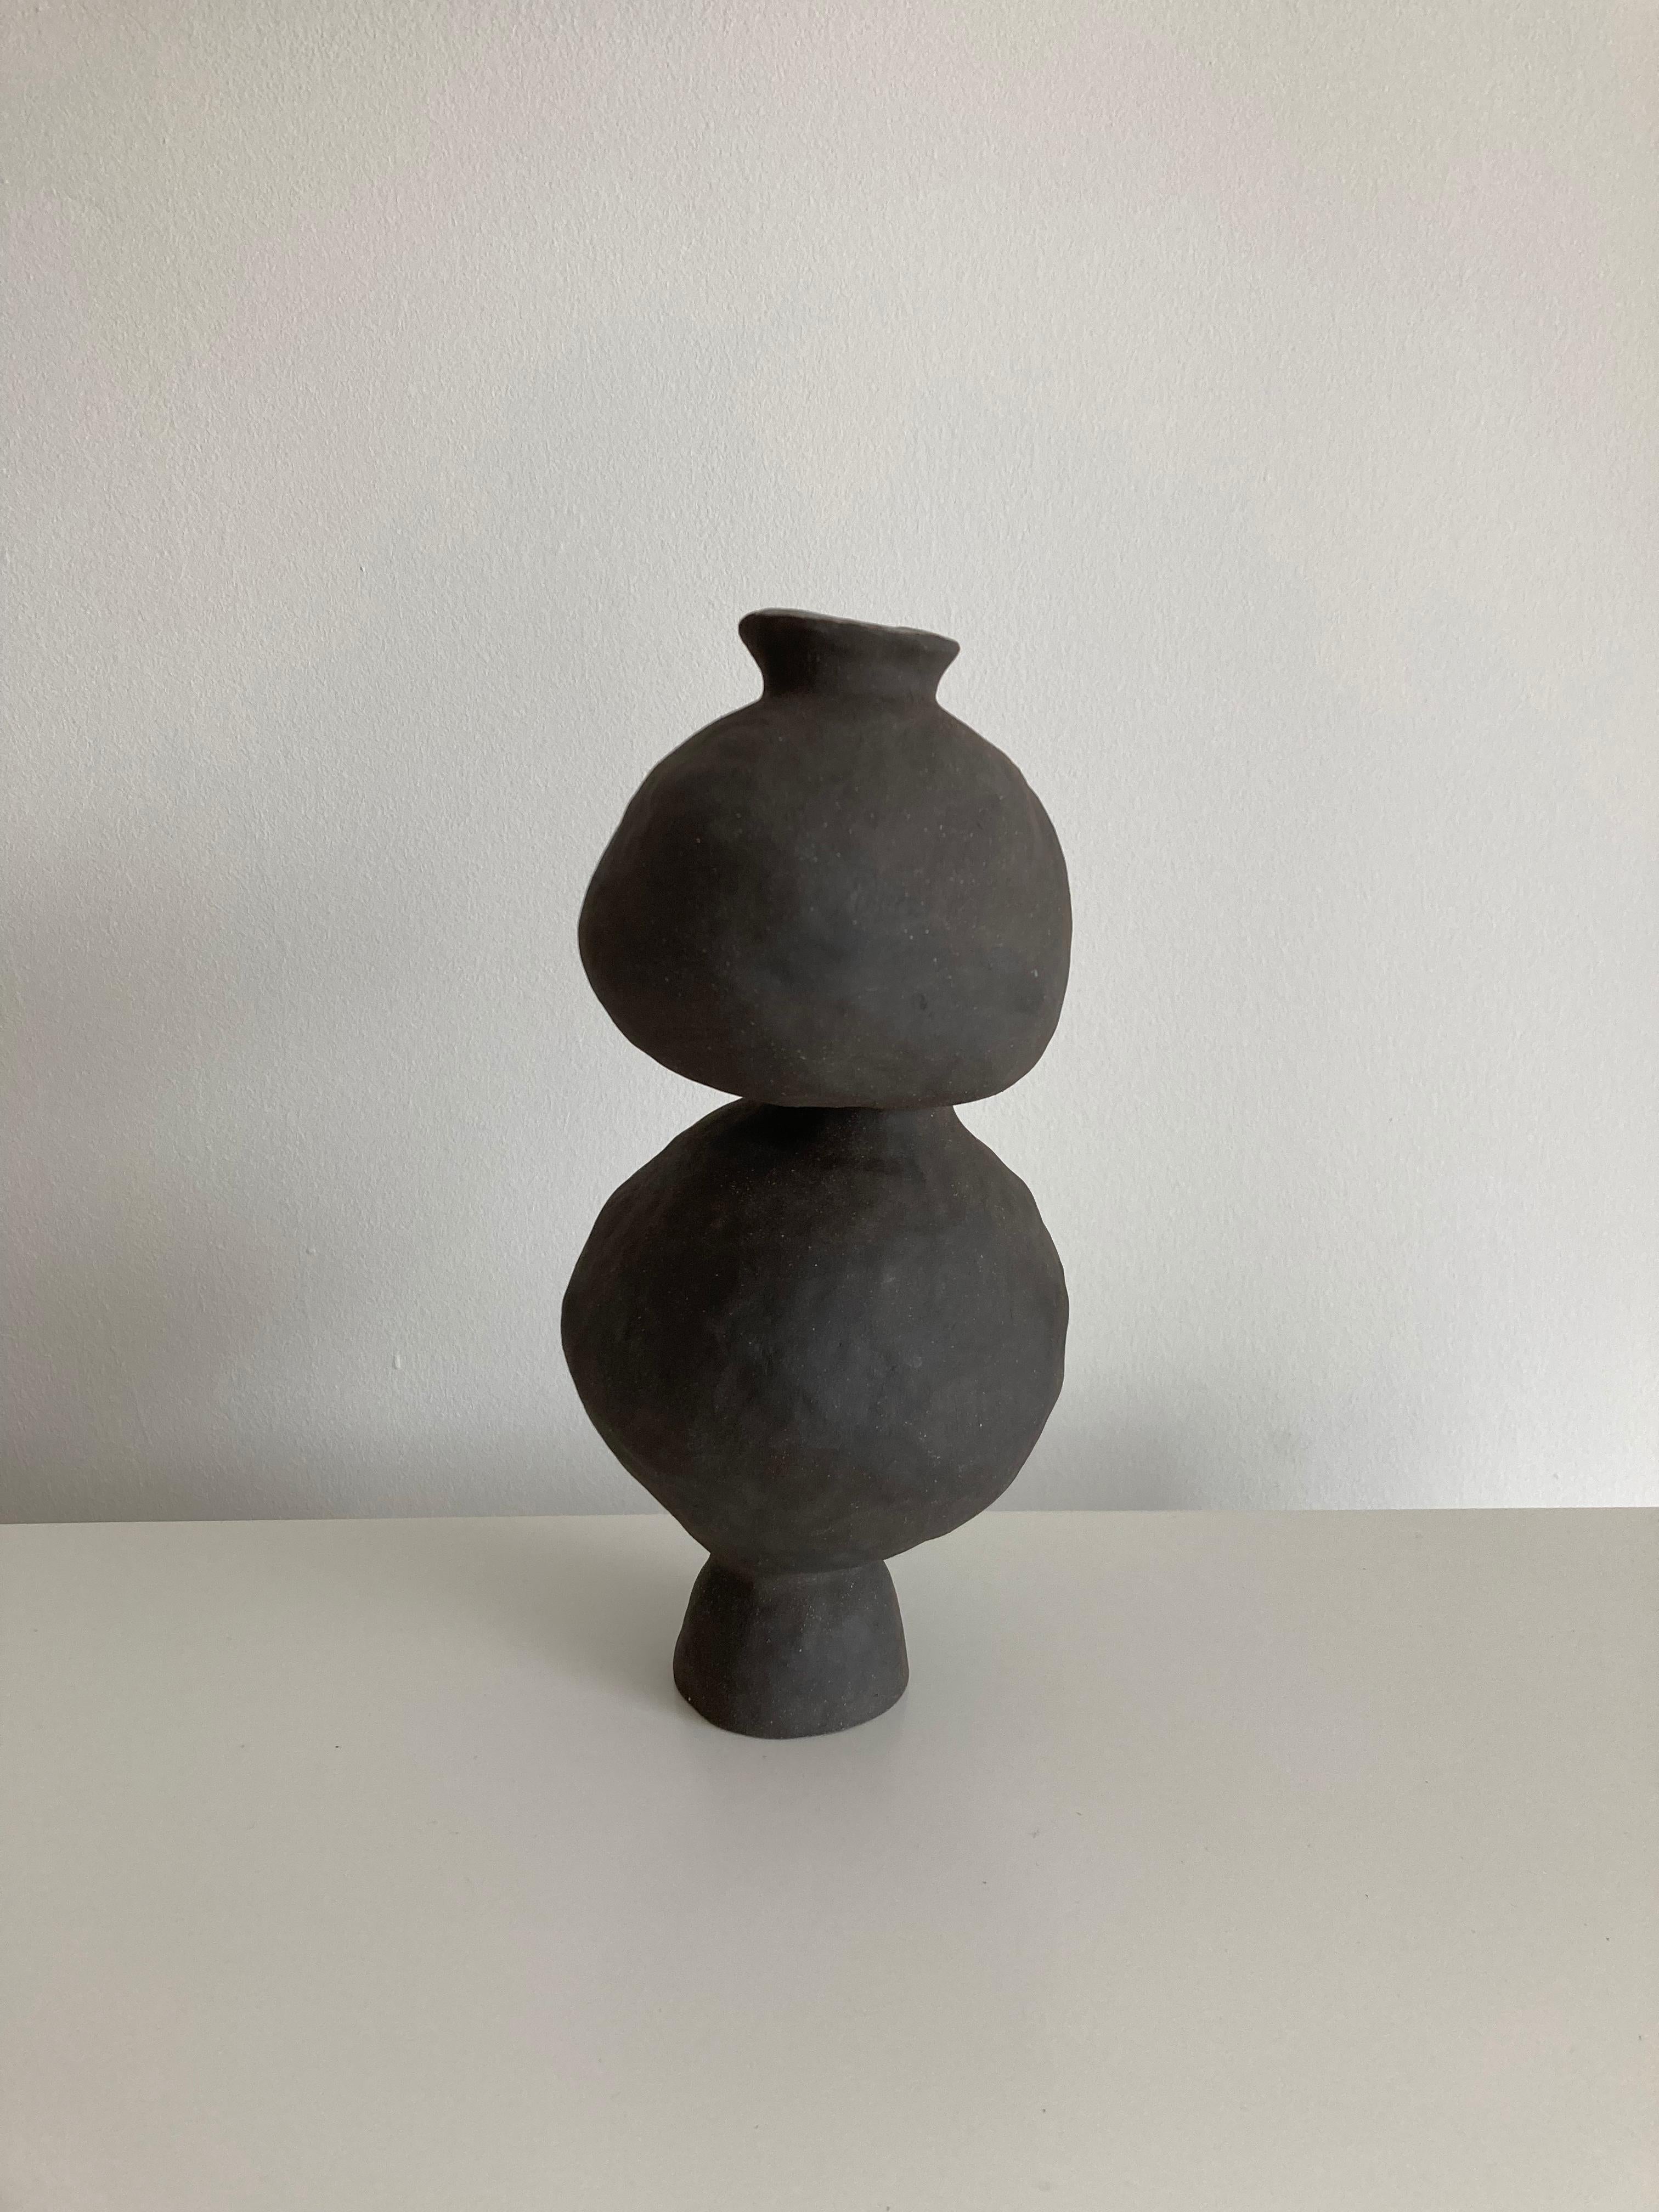 No.100 stoneware sculpture, tonfisk by Ciona Lee 
One of a Kind
Dimensions: Ø 12 x H 10 cm
Materials: Black stoneware, Unglazed exterior
Variations of size and colour available

Tonfisk is the ceramic practice by Ciona Lee, a Korean-Italian